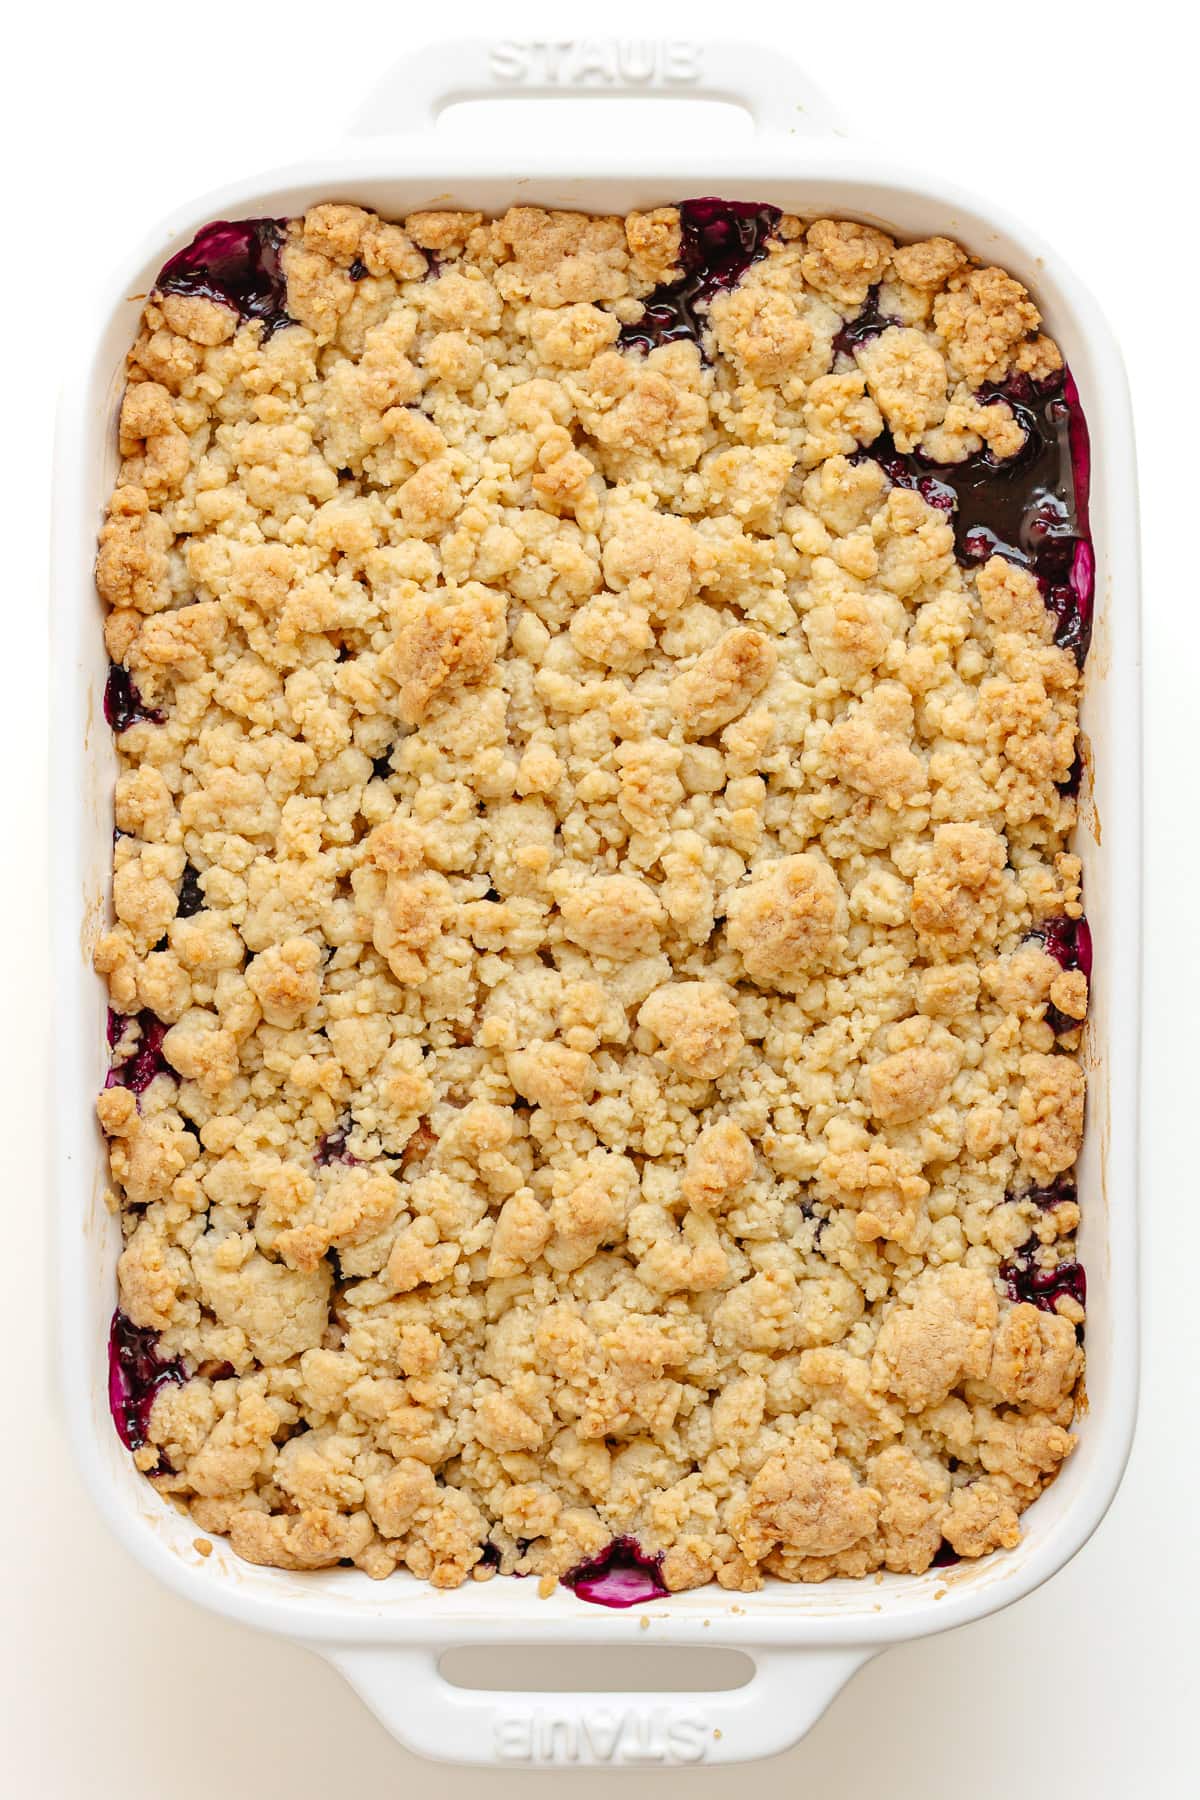 Finished baked blueberry apple crumble in white baking dish.